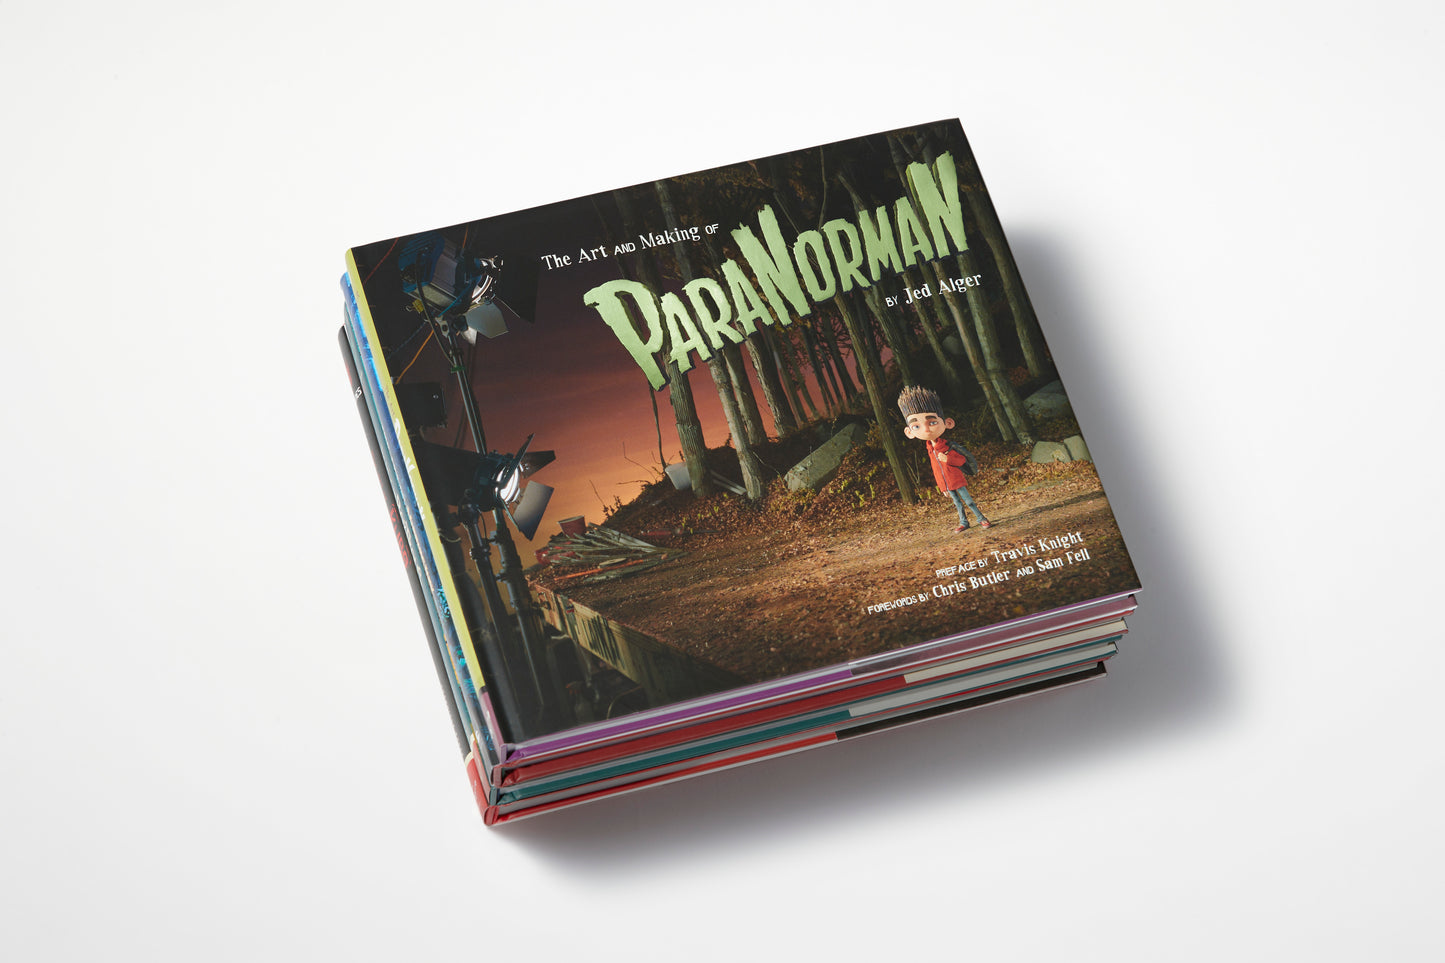 The Art Of ParaNorman